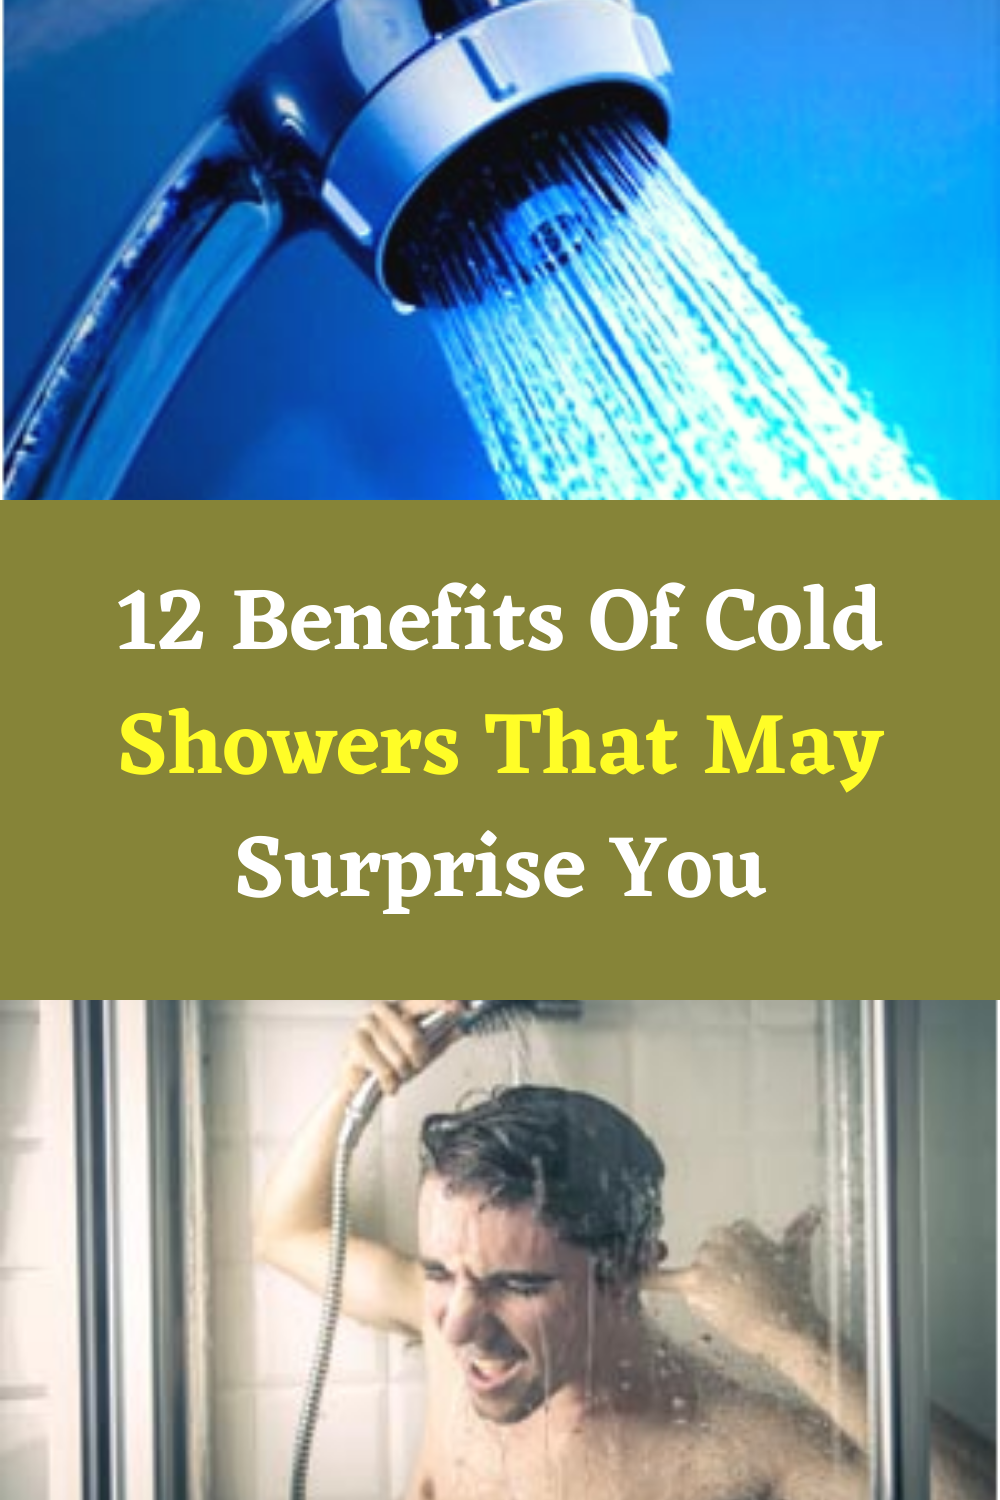 12 Benefits Of Cold Showers That May Surprise You